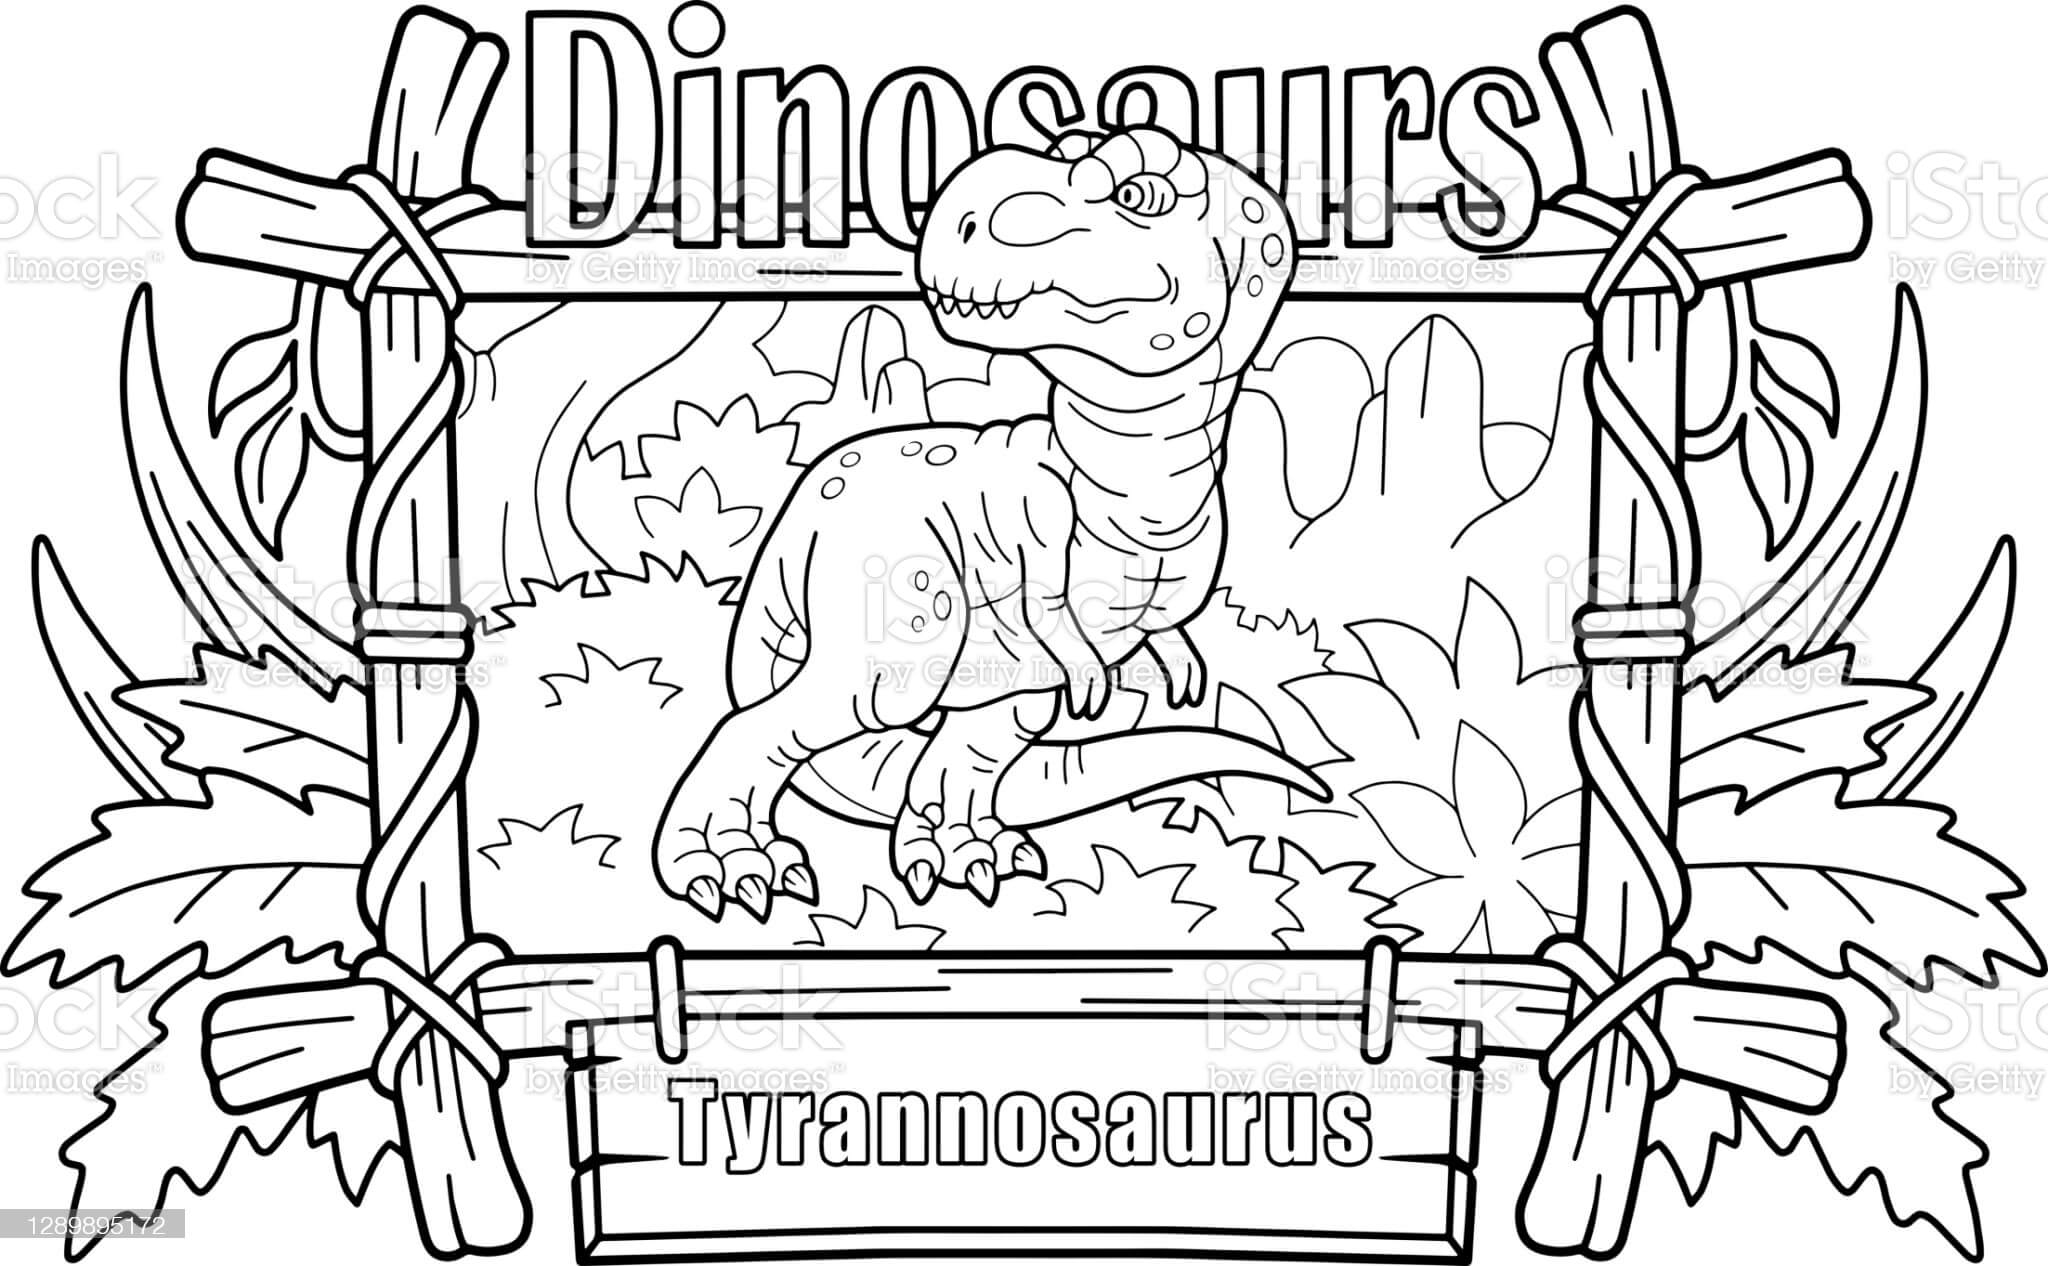 lego t rex coloring page | scary t rex coloring page | t rex coloring page pdf